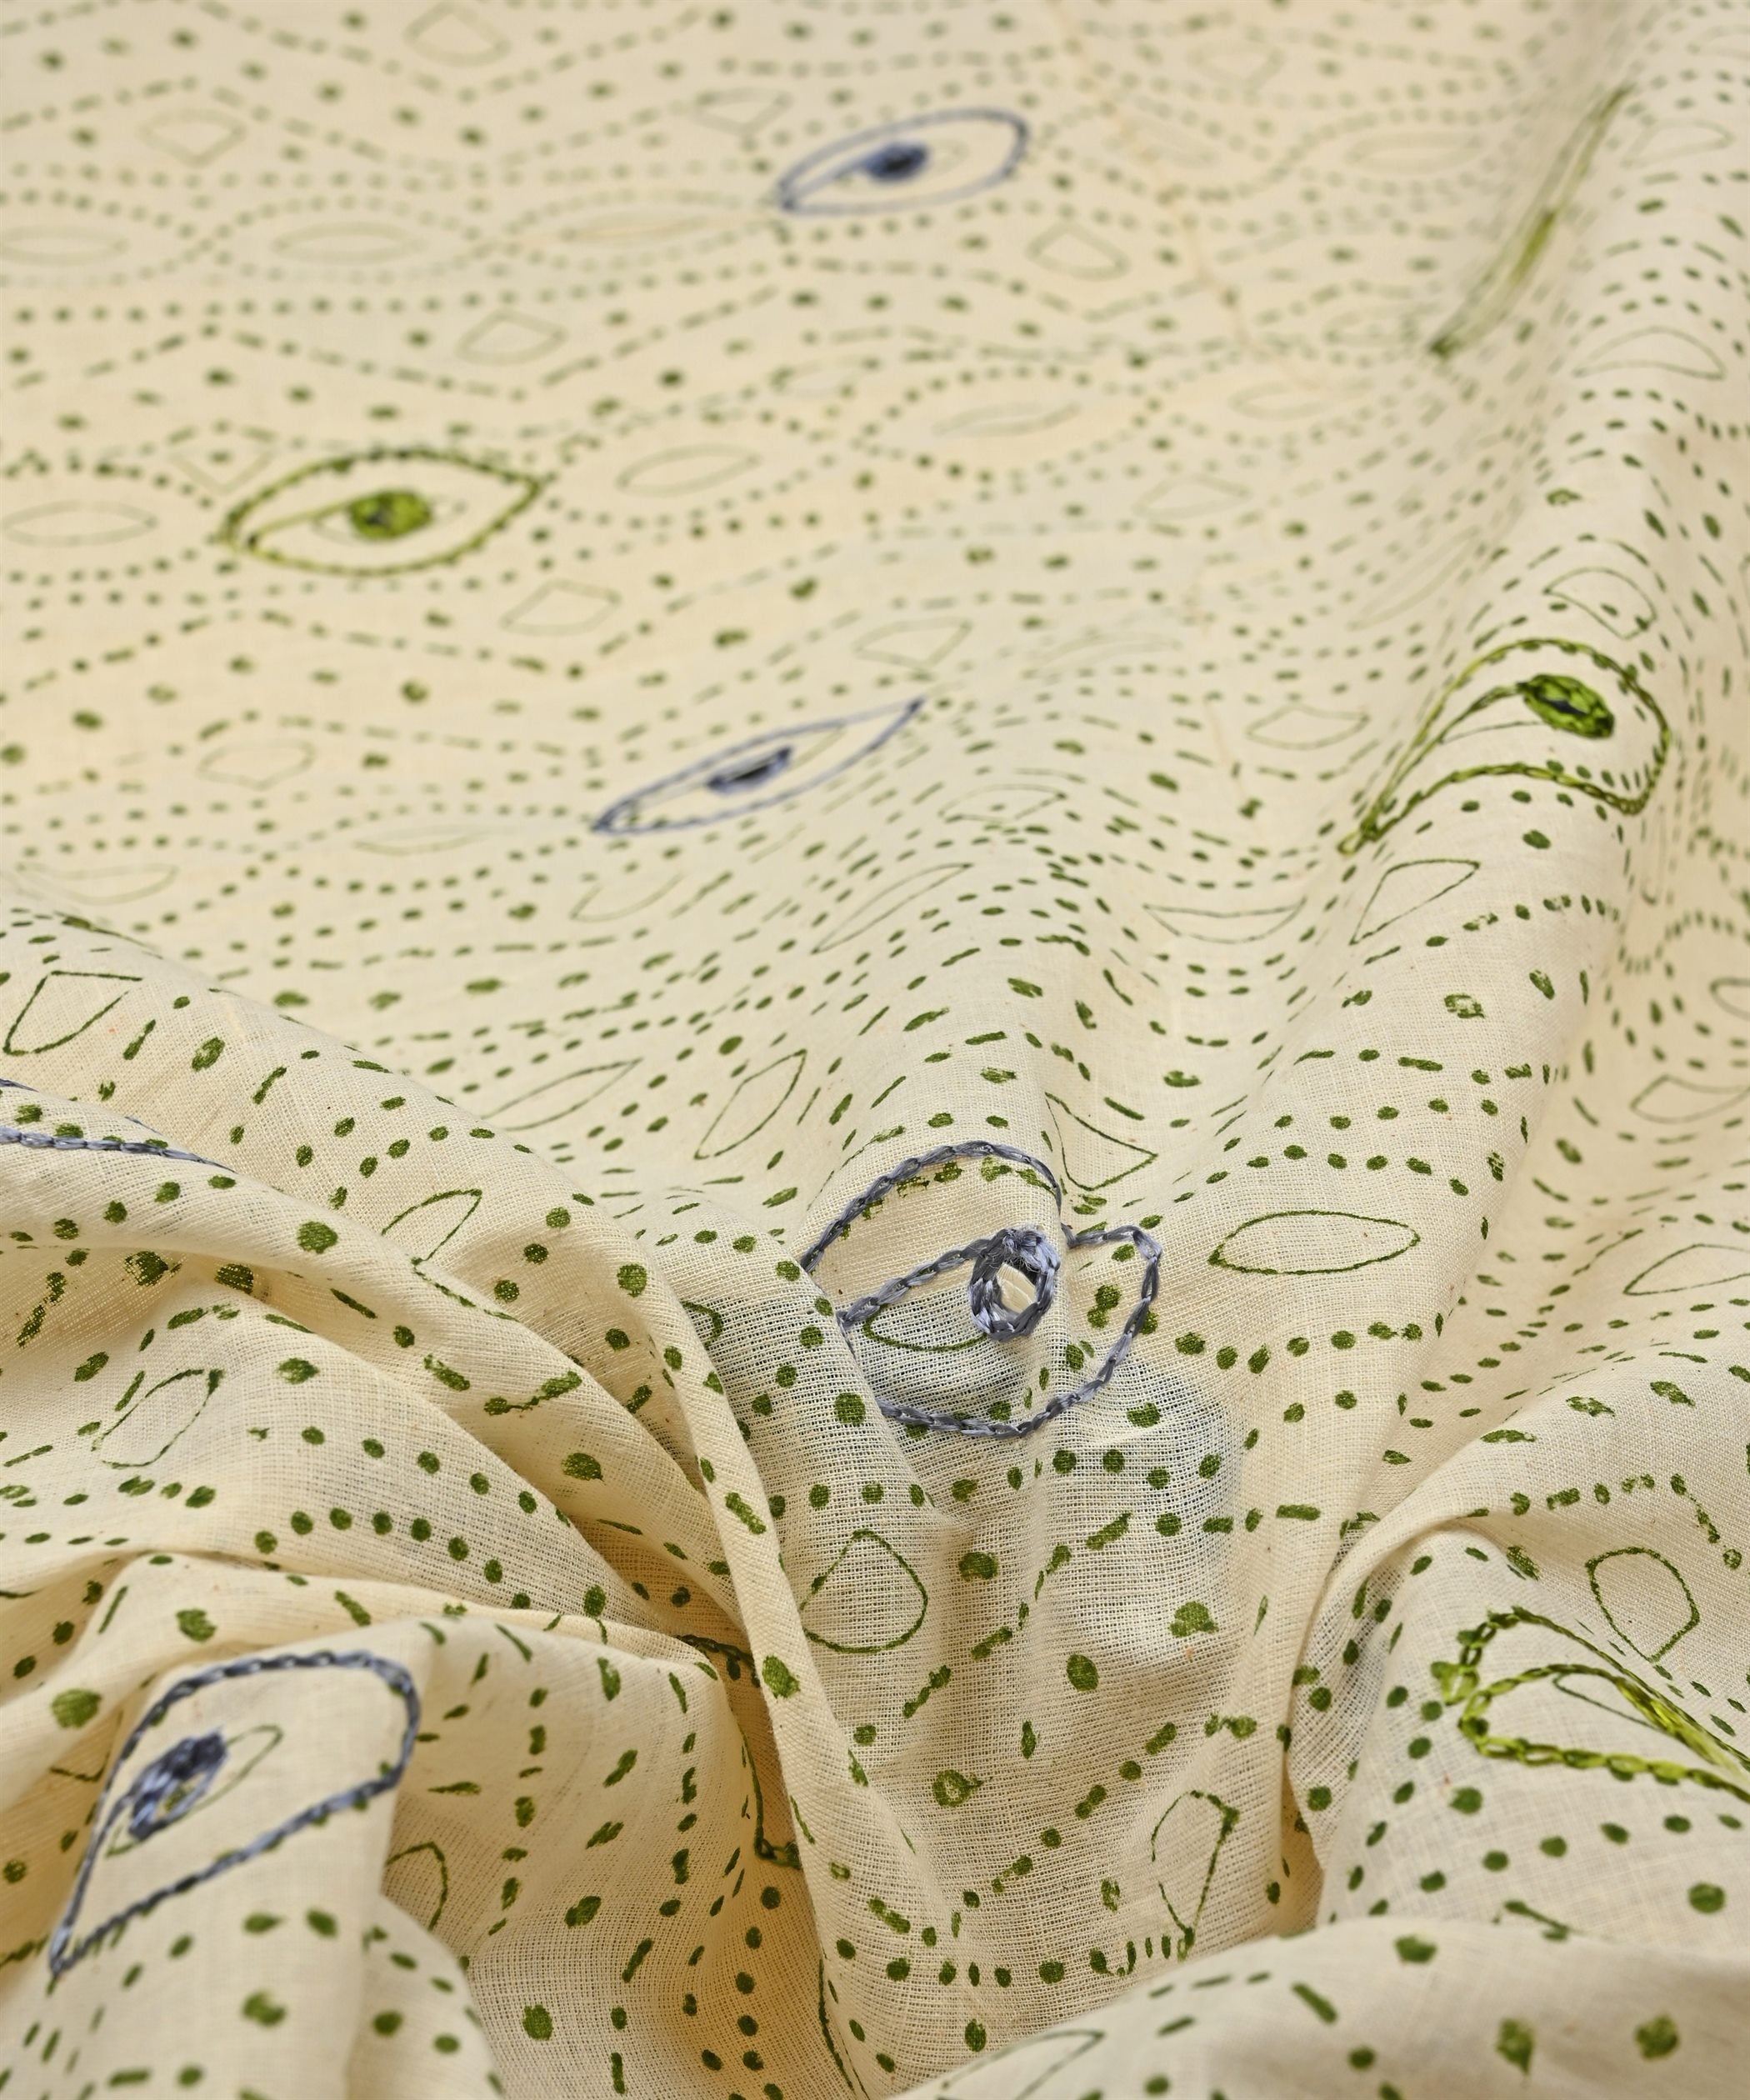 Green printed Mal Cotton fabric with gray embroidery and mirror work